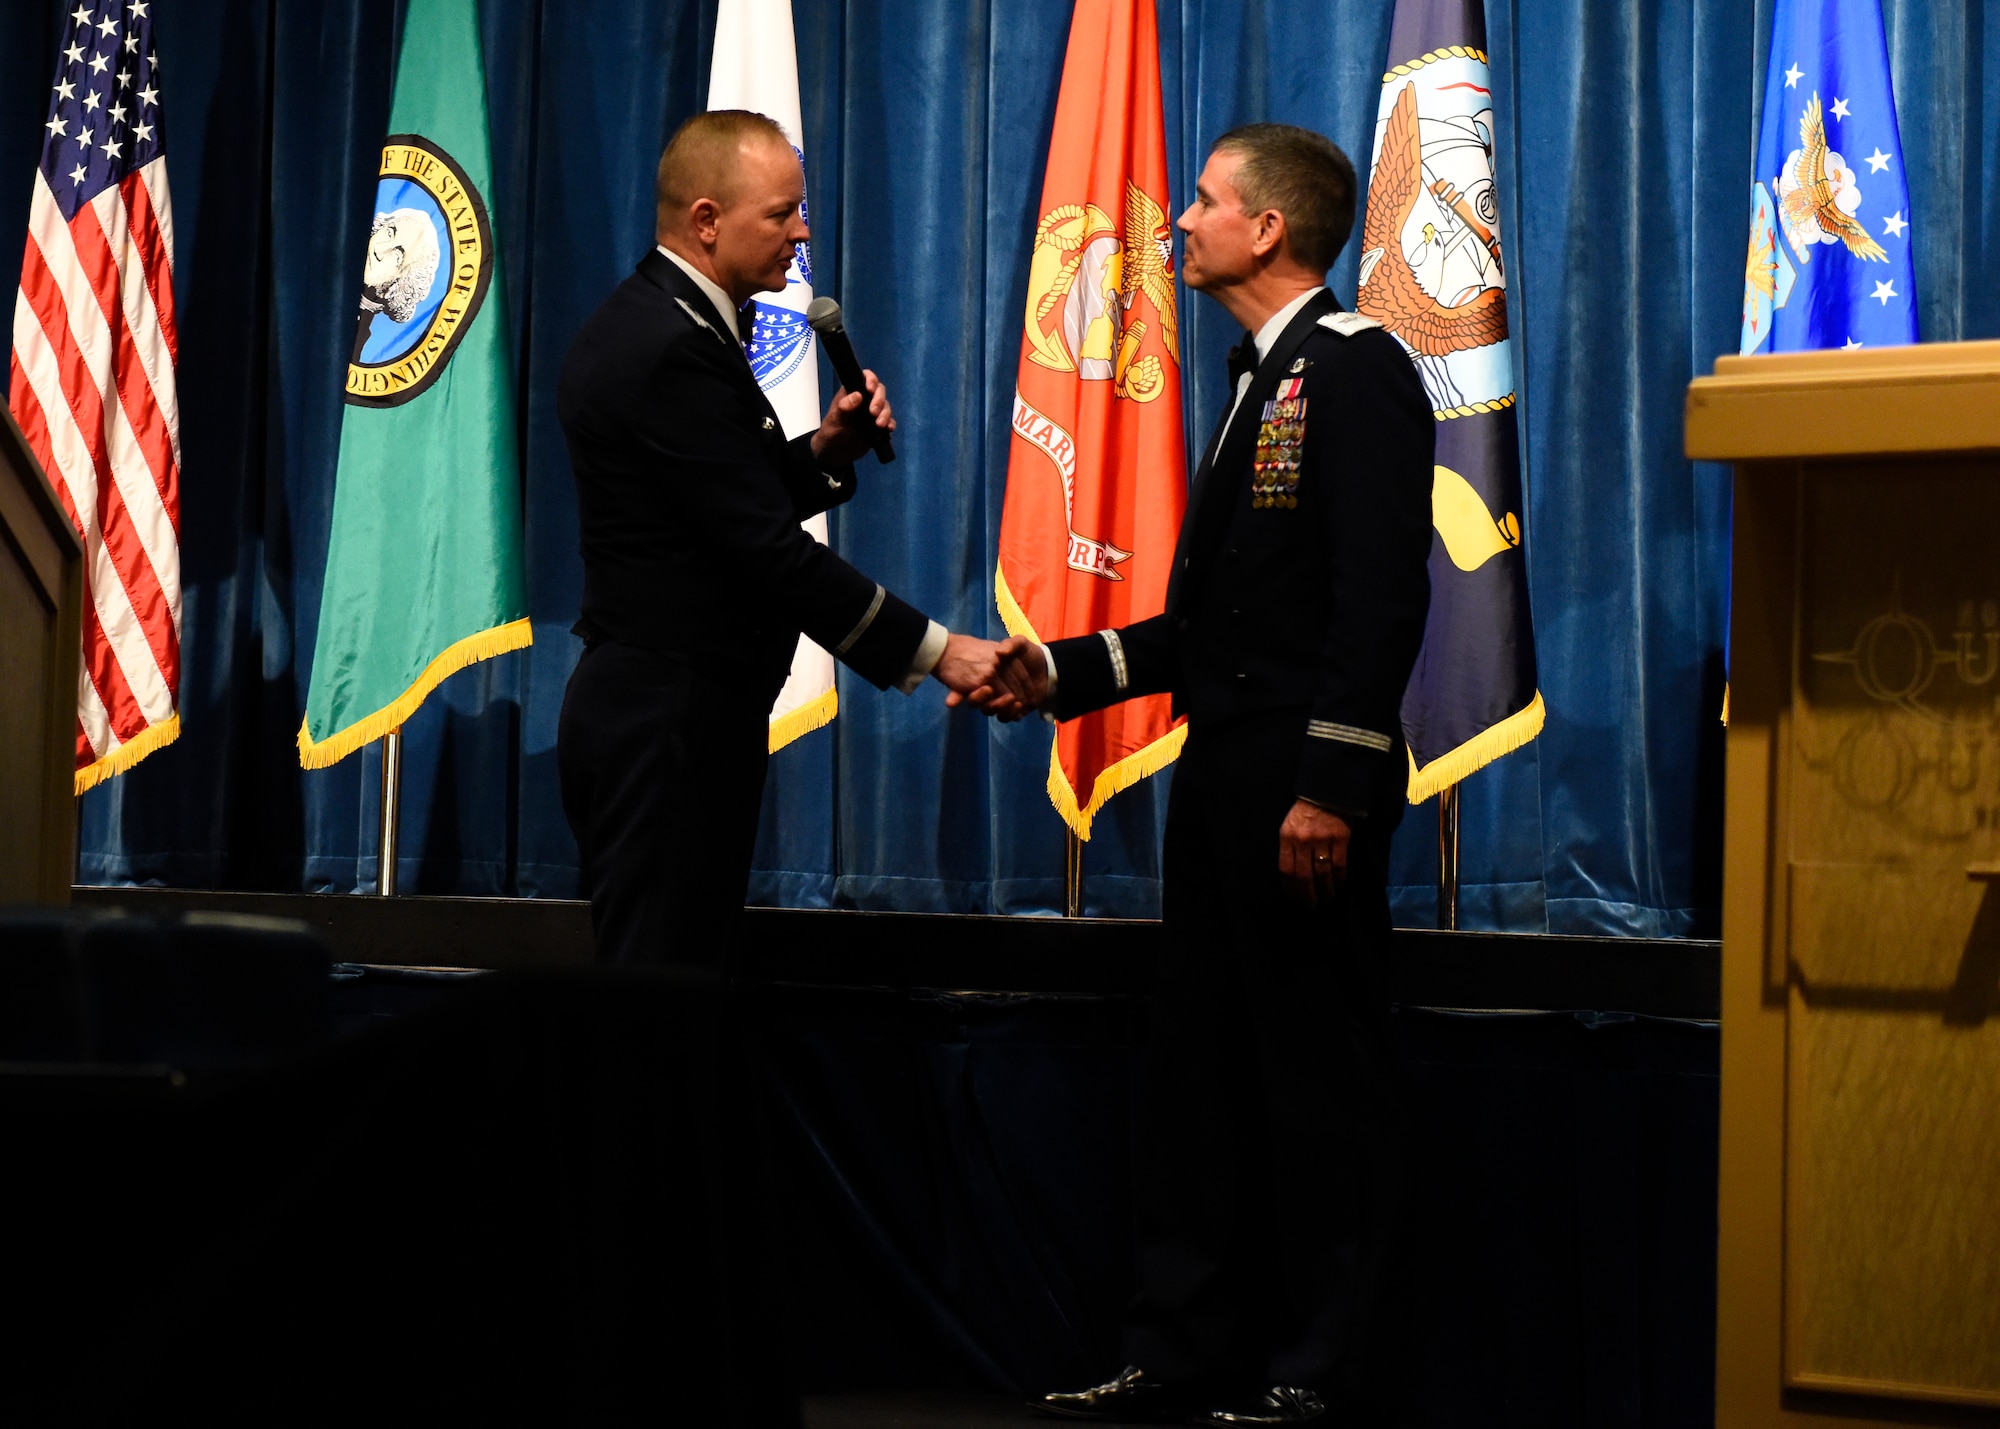 Col. Derek Salmi, 92nd Air Refueling Wing commander, thanks Brig. Gen. Paul Tibbets, Global Strike Command deputy commander, for being the guest speaker during Fairchild's Air Force Ball at Northern Resort and Casino in Airway Heights, Washington, Sept. 15, 2018. Salmi presented Tibbets with a Commander's Coin, along with several other gifts, as a sign of appreciation for speaking at and attending the Air Force Ball. (U.S. Air Force photo/Airman 1st Class Lawrence Sena)